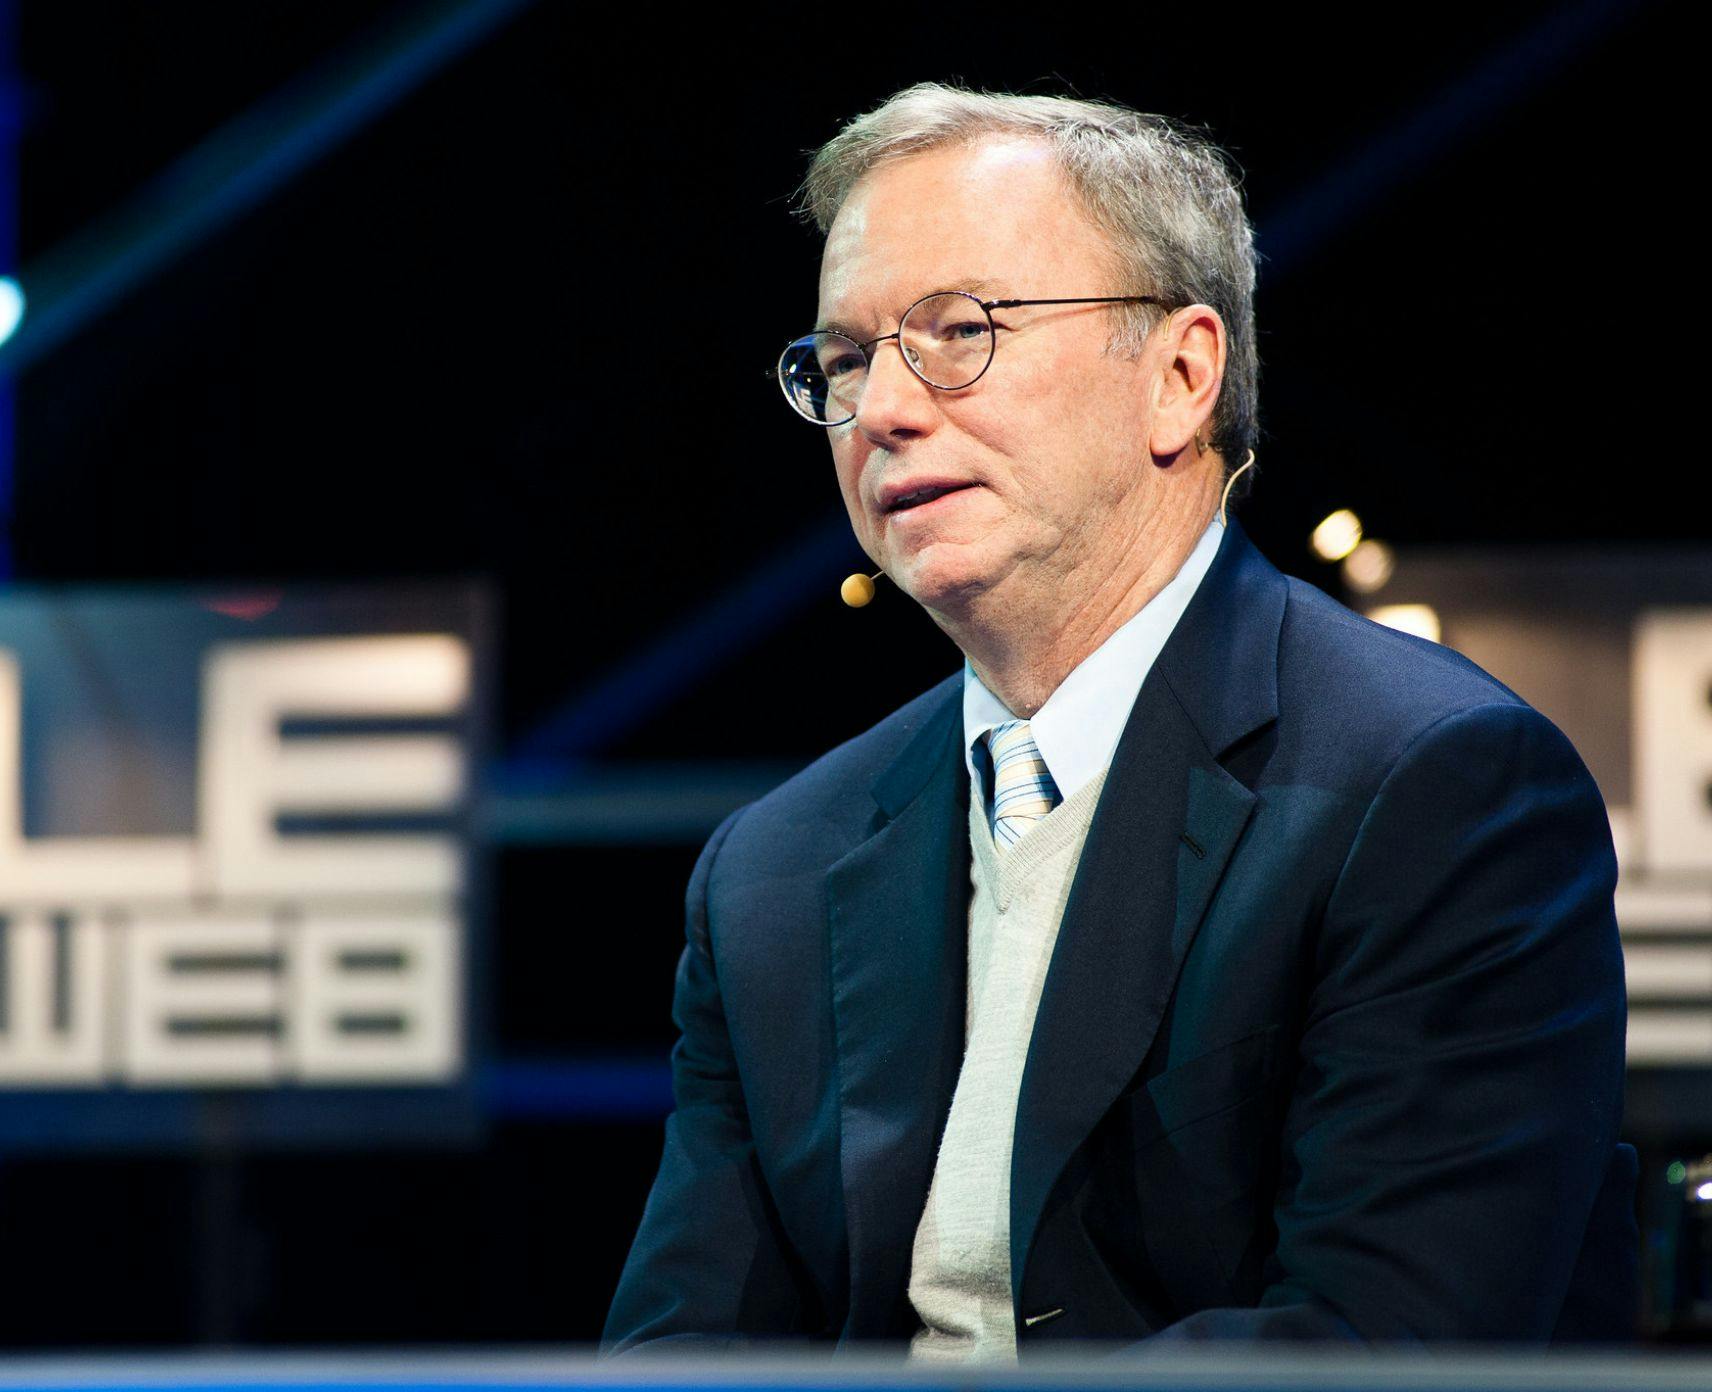 Former Google CEO Eric Schmidt sitting on a stage